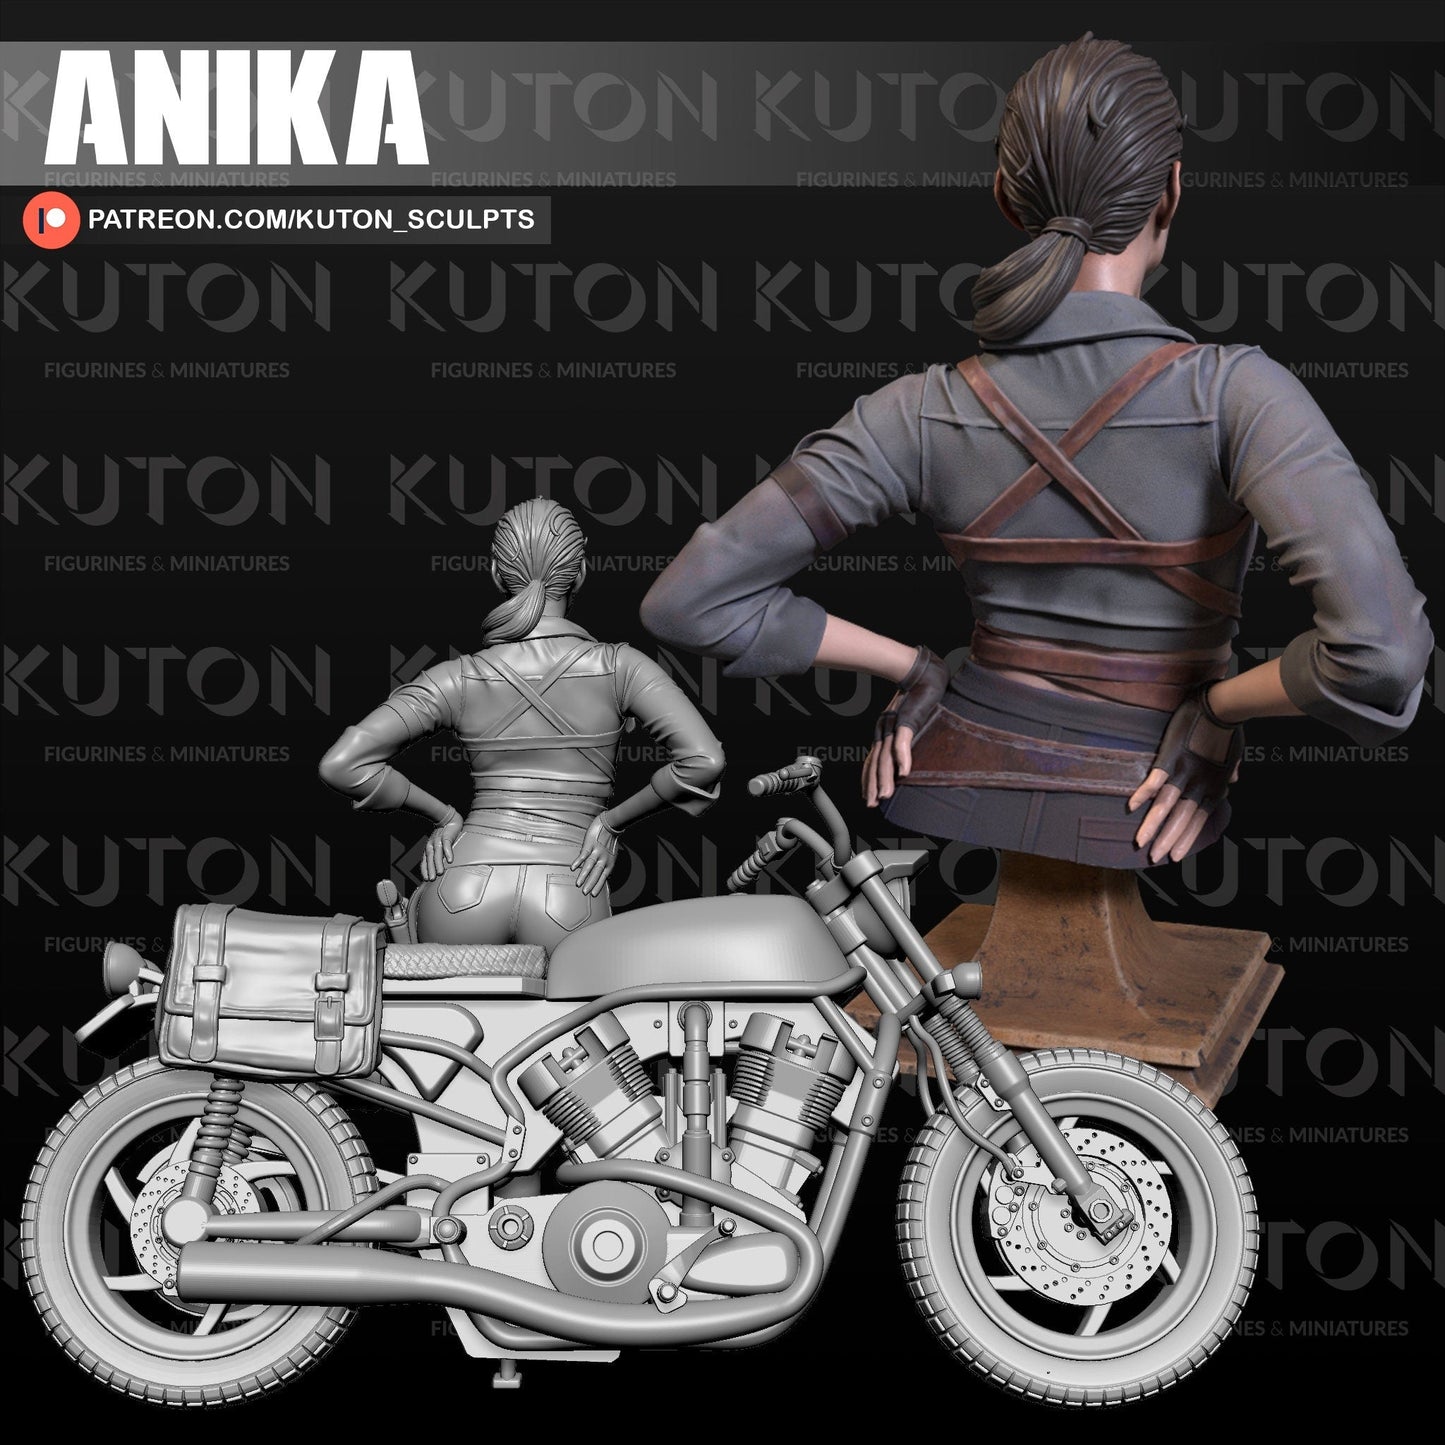 Anika DIORAMA 3d printed Resin Figure Model Kit miniatures figurines collectibles and scale models UNPAINTED Fun Art by KUTON FIGURINES